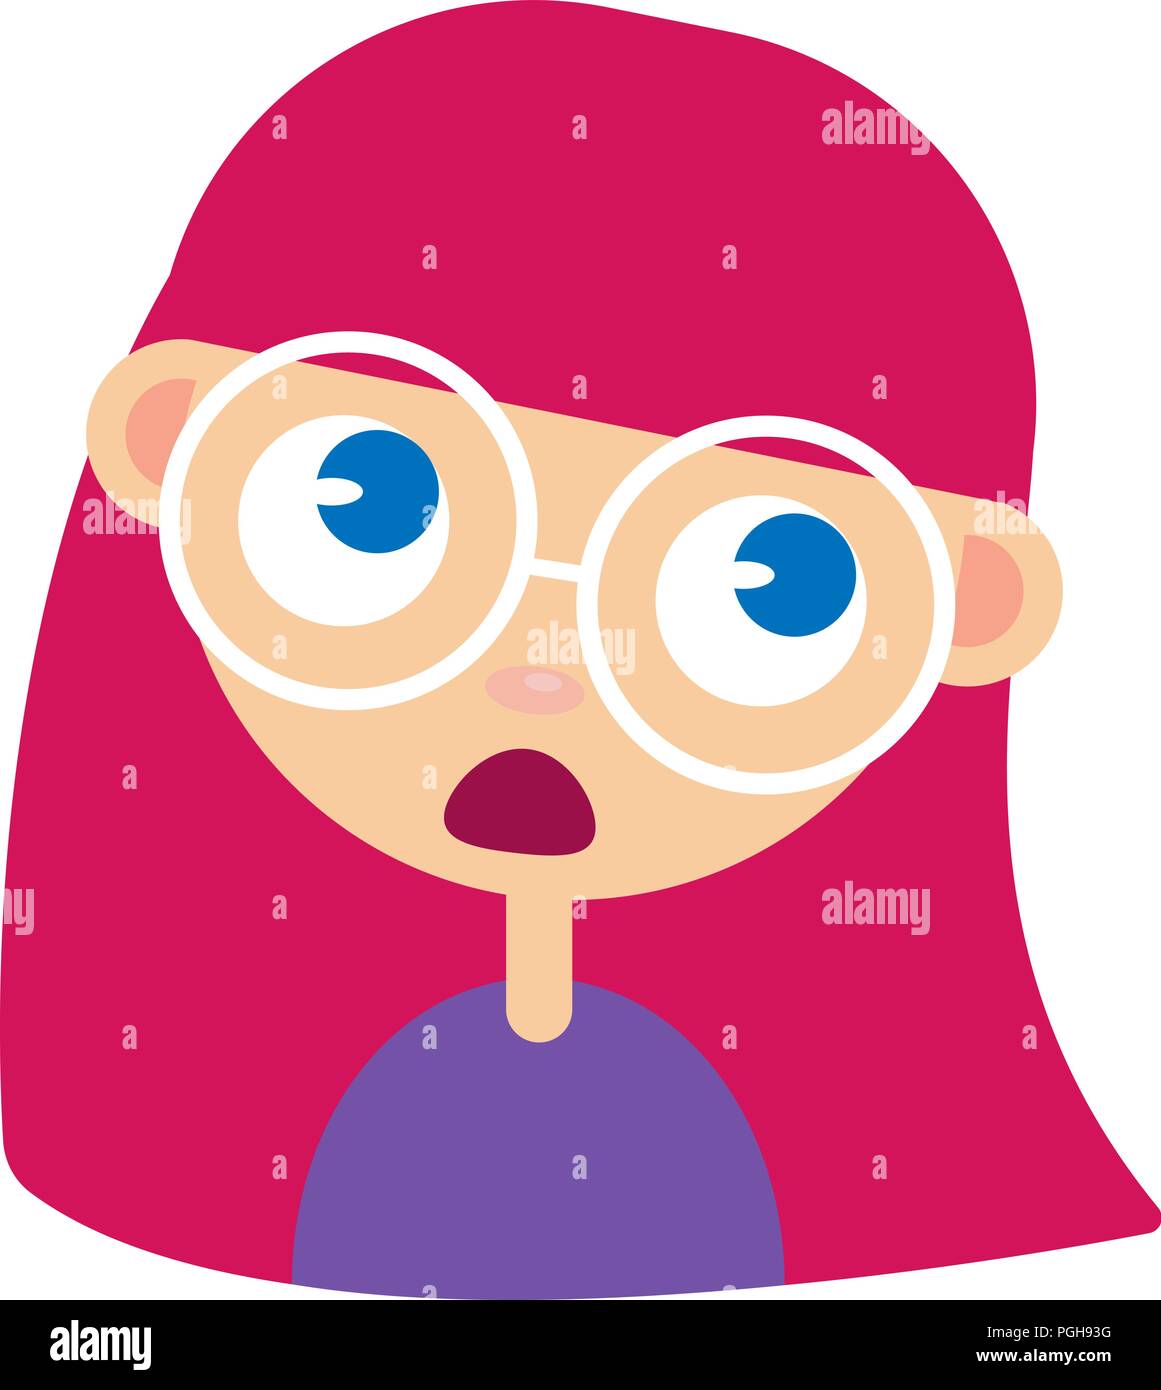 Teen girl face, surprised facial expression, cartoon vector illustrations isolated on white background. Red-haired girl emoji surprised, shocked, amazed, astonished. Stock Vector